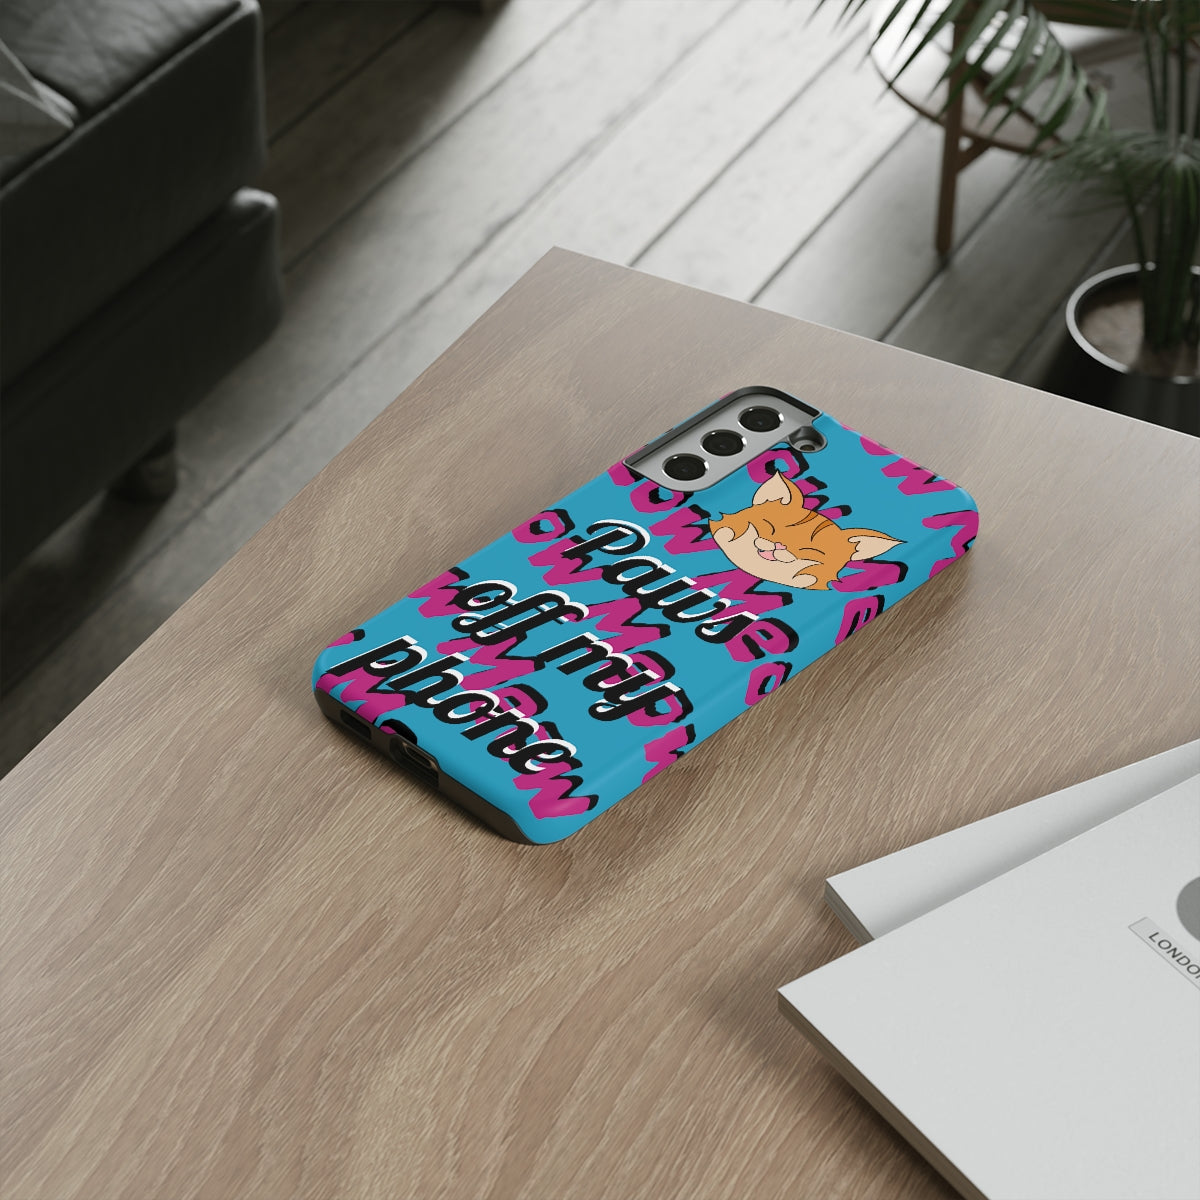 Stand out  with the  Tough Cases  available at Hey Nugget. Grab yours today!